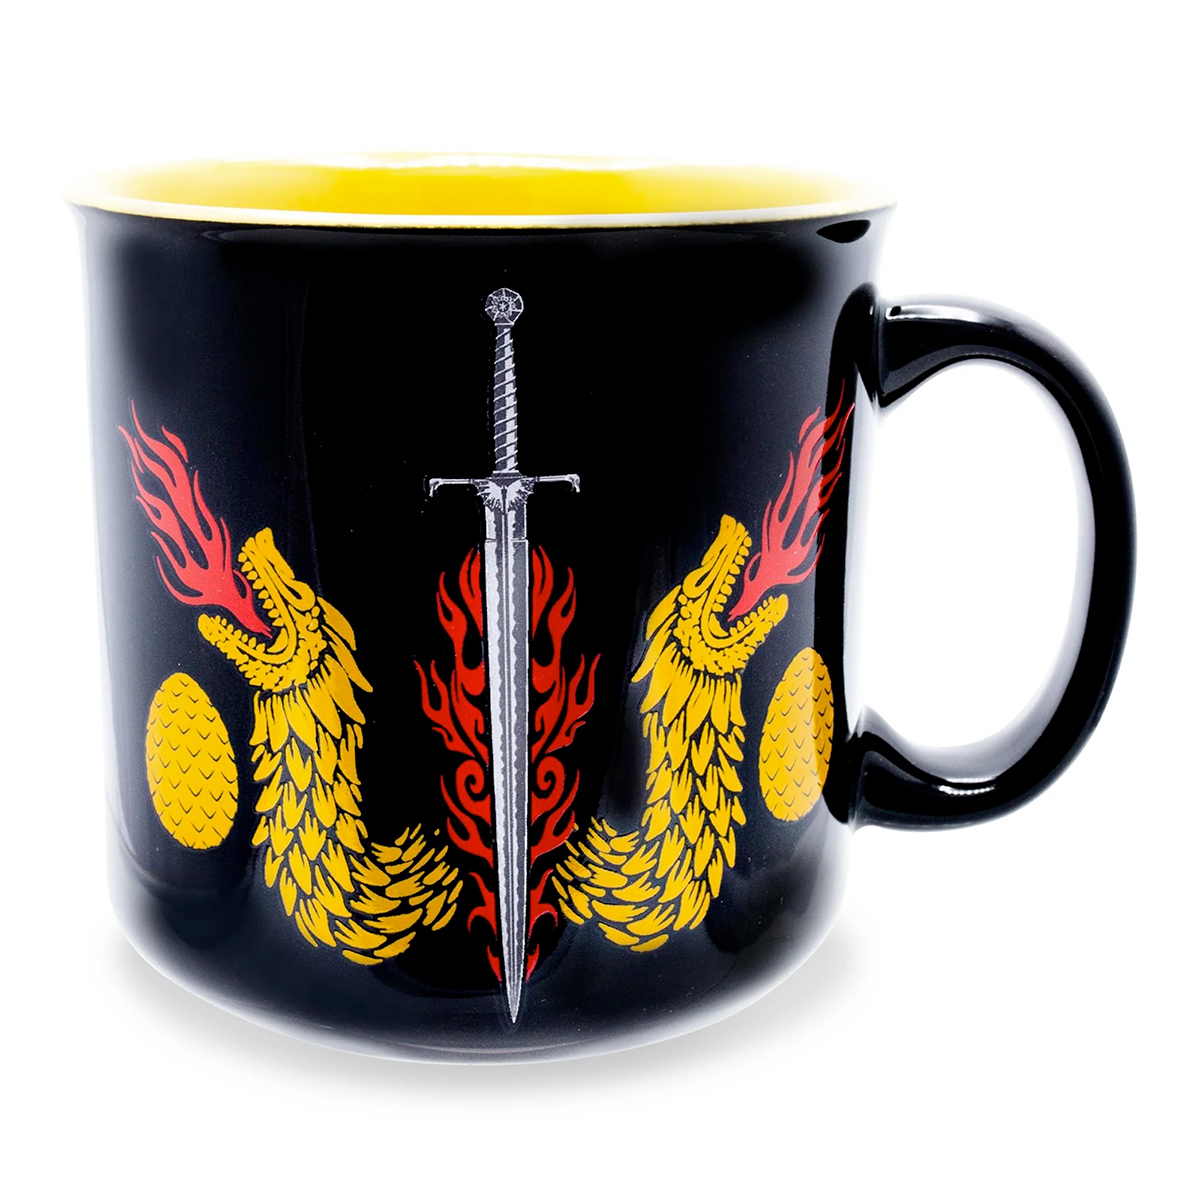 Caneca Camper House of the Dragon 